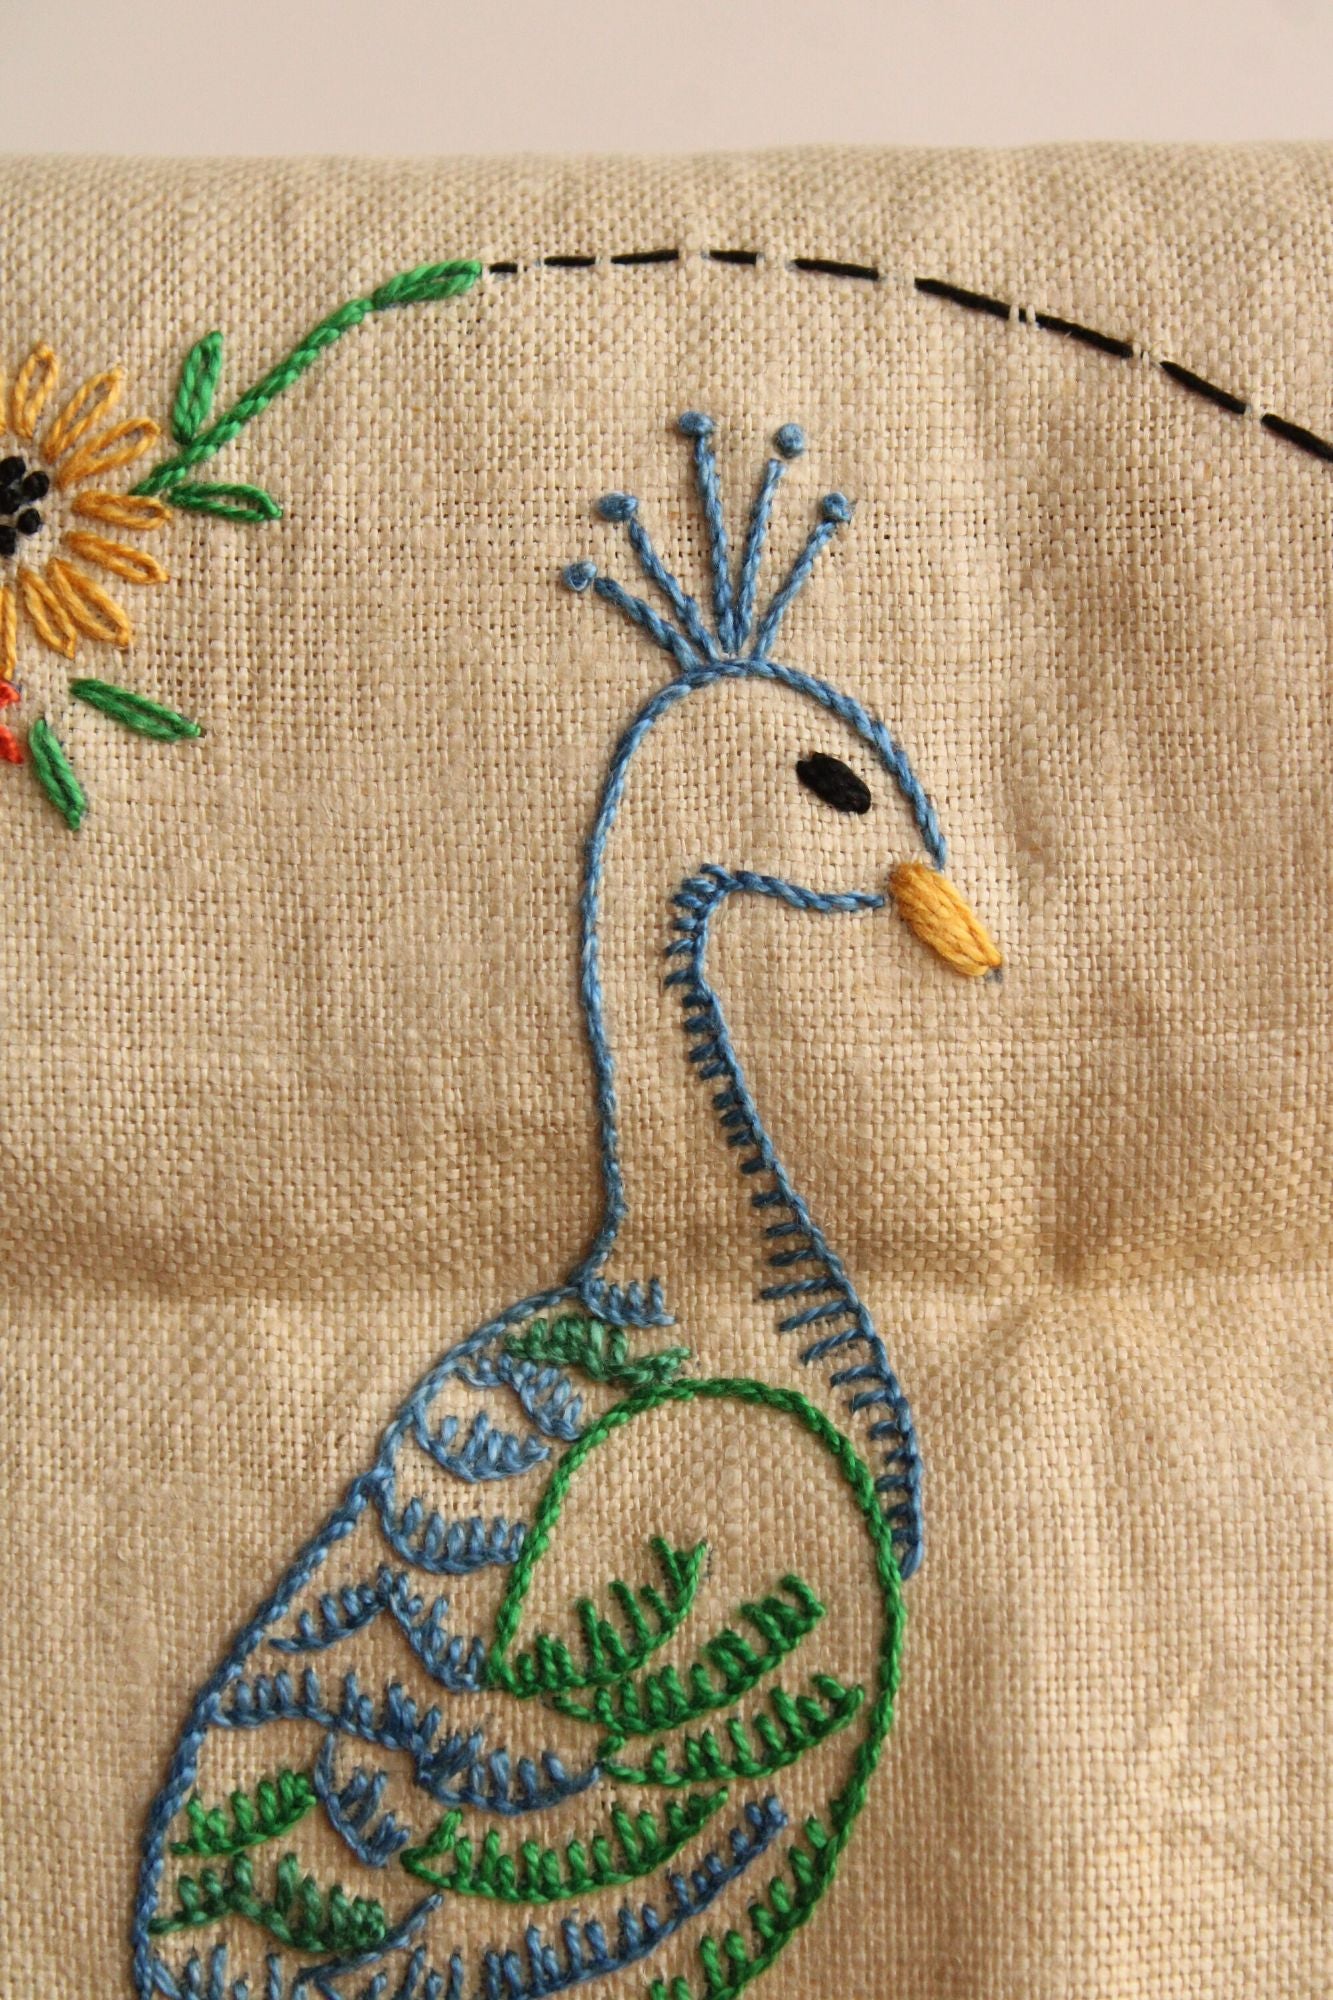 Vintage 1960s 1970s Table Runner With Embroidered Peacock and Flowers